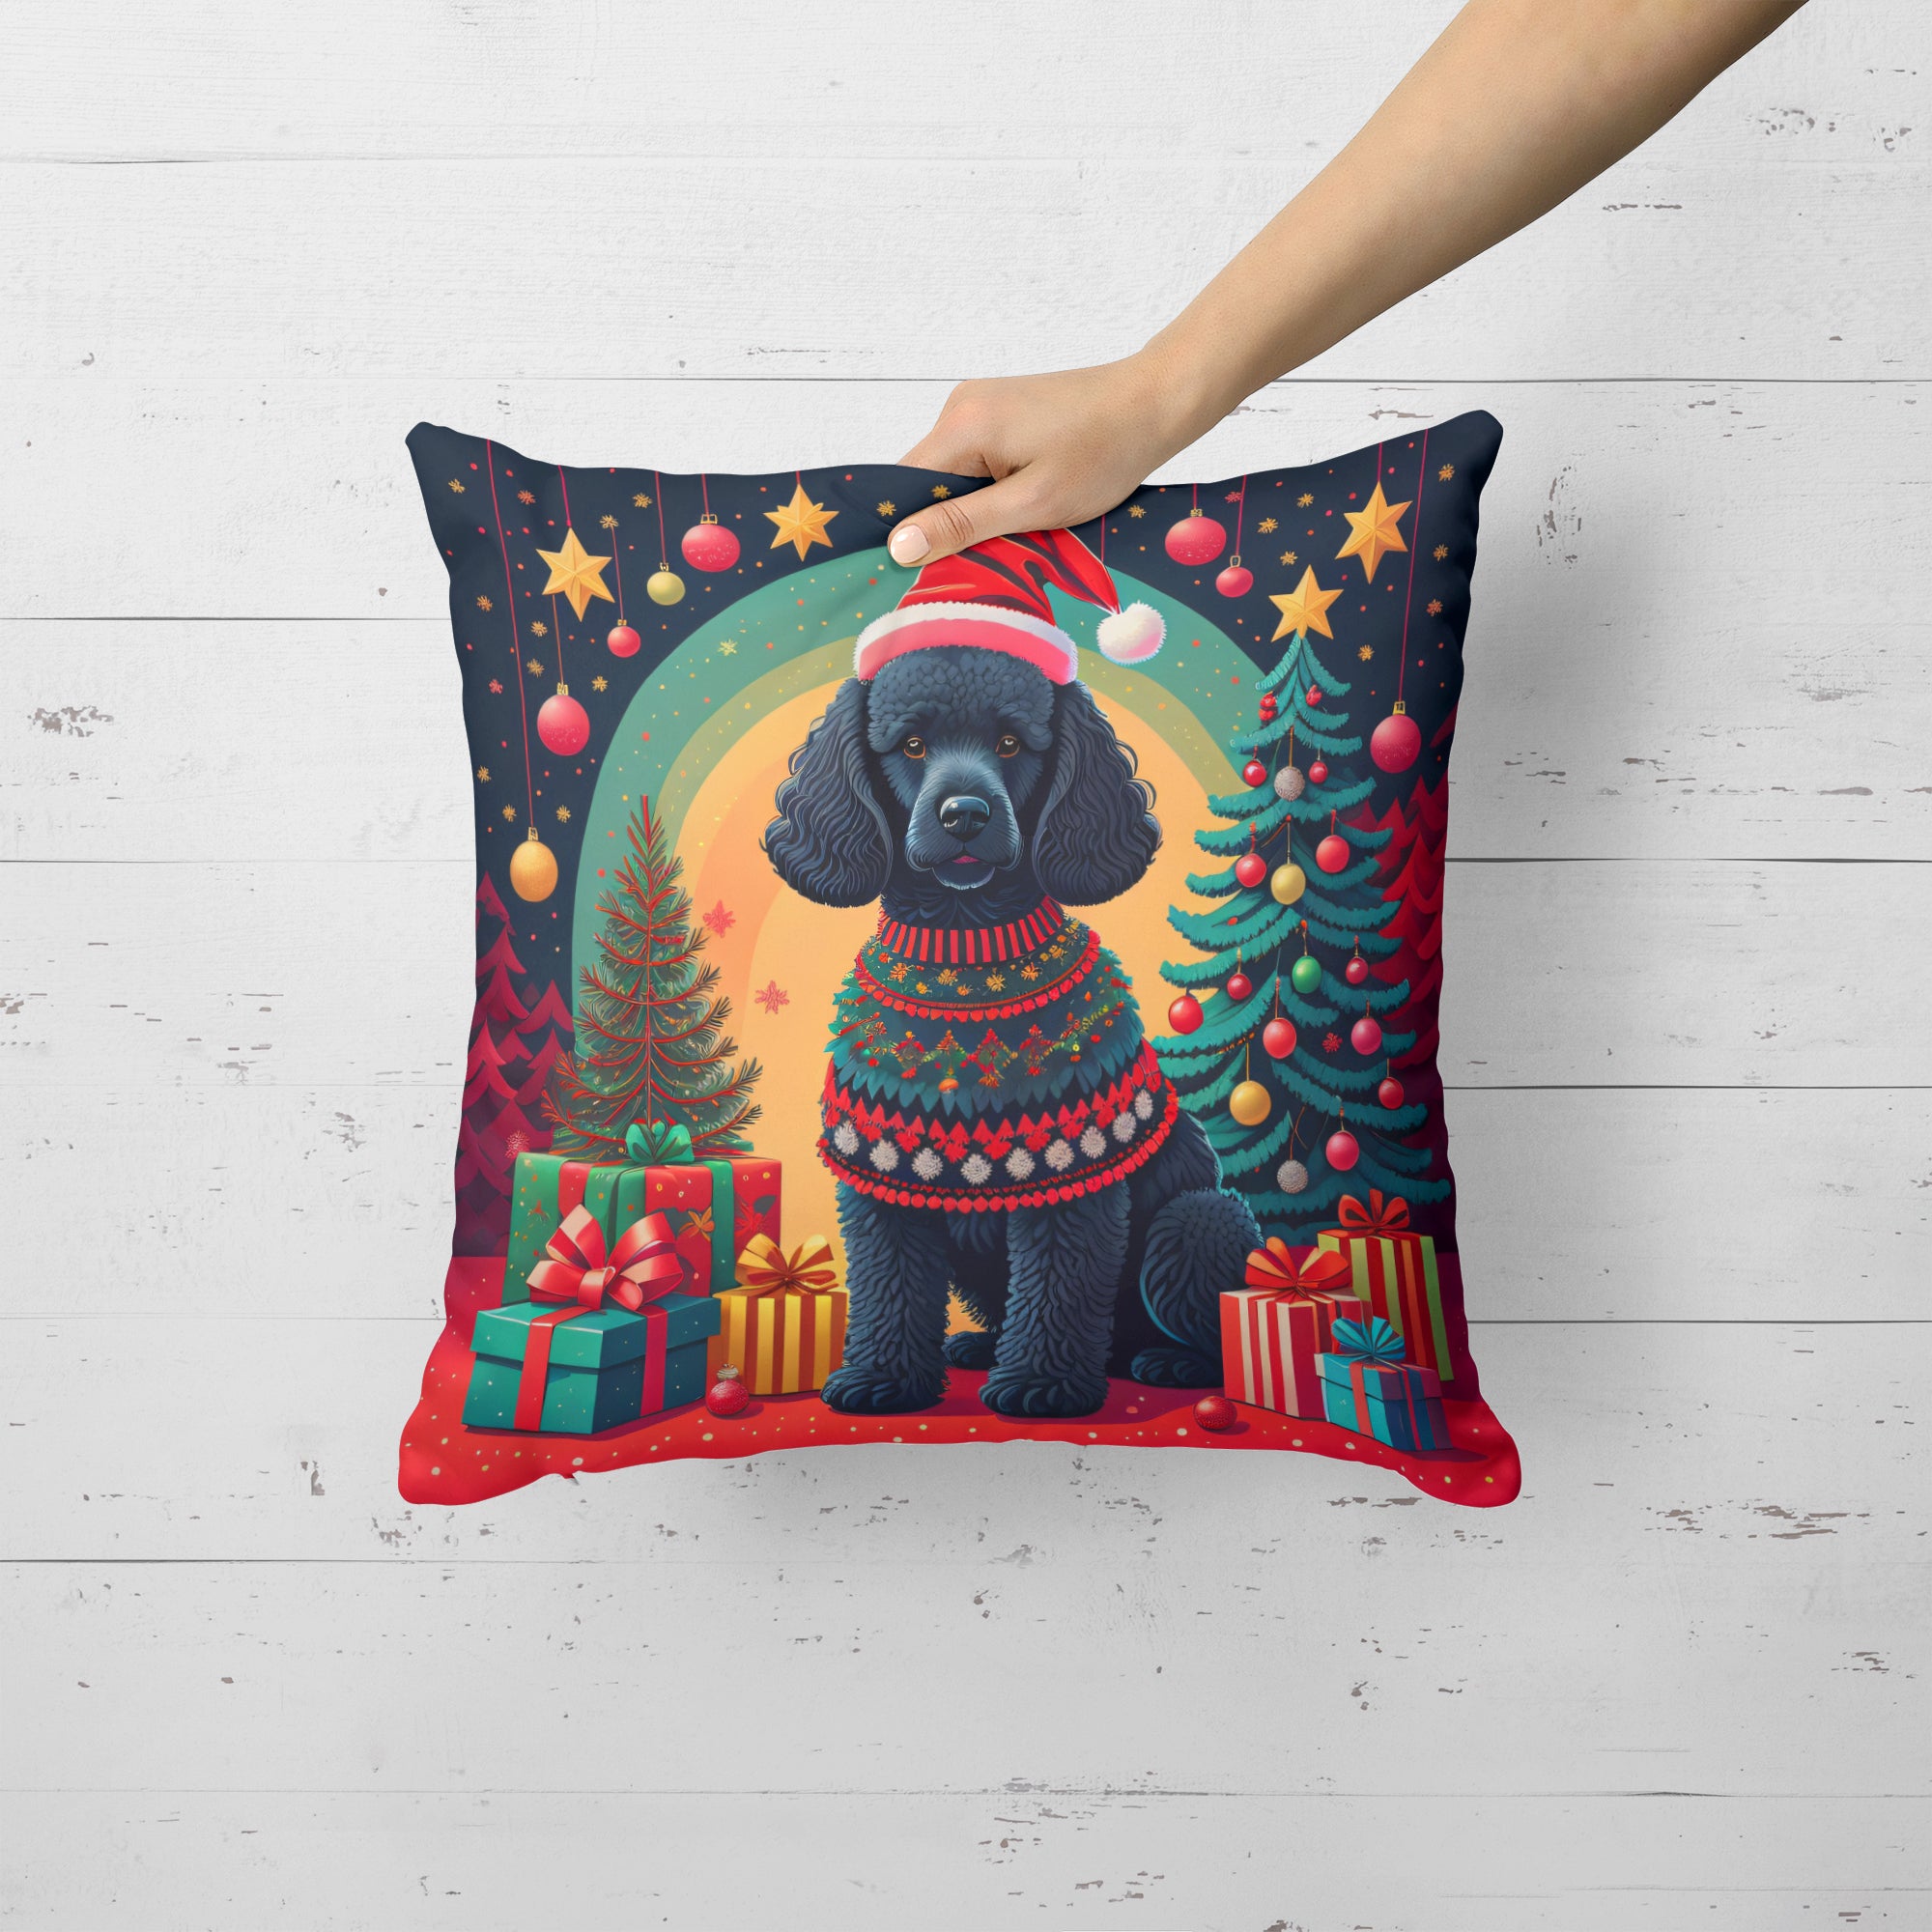 Buy this Black  Poodle Christmas Fabric Decorative Pillow